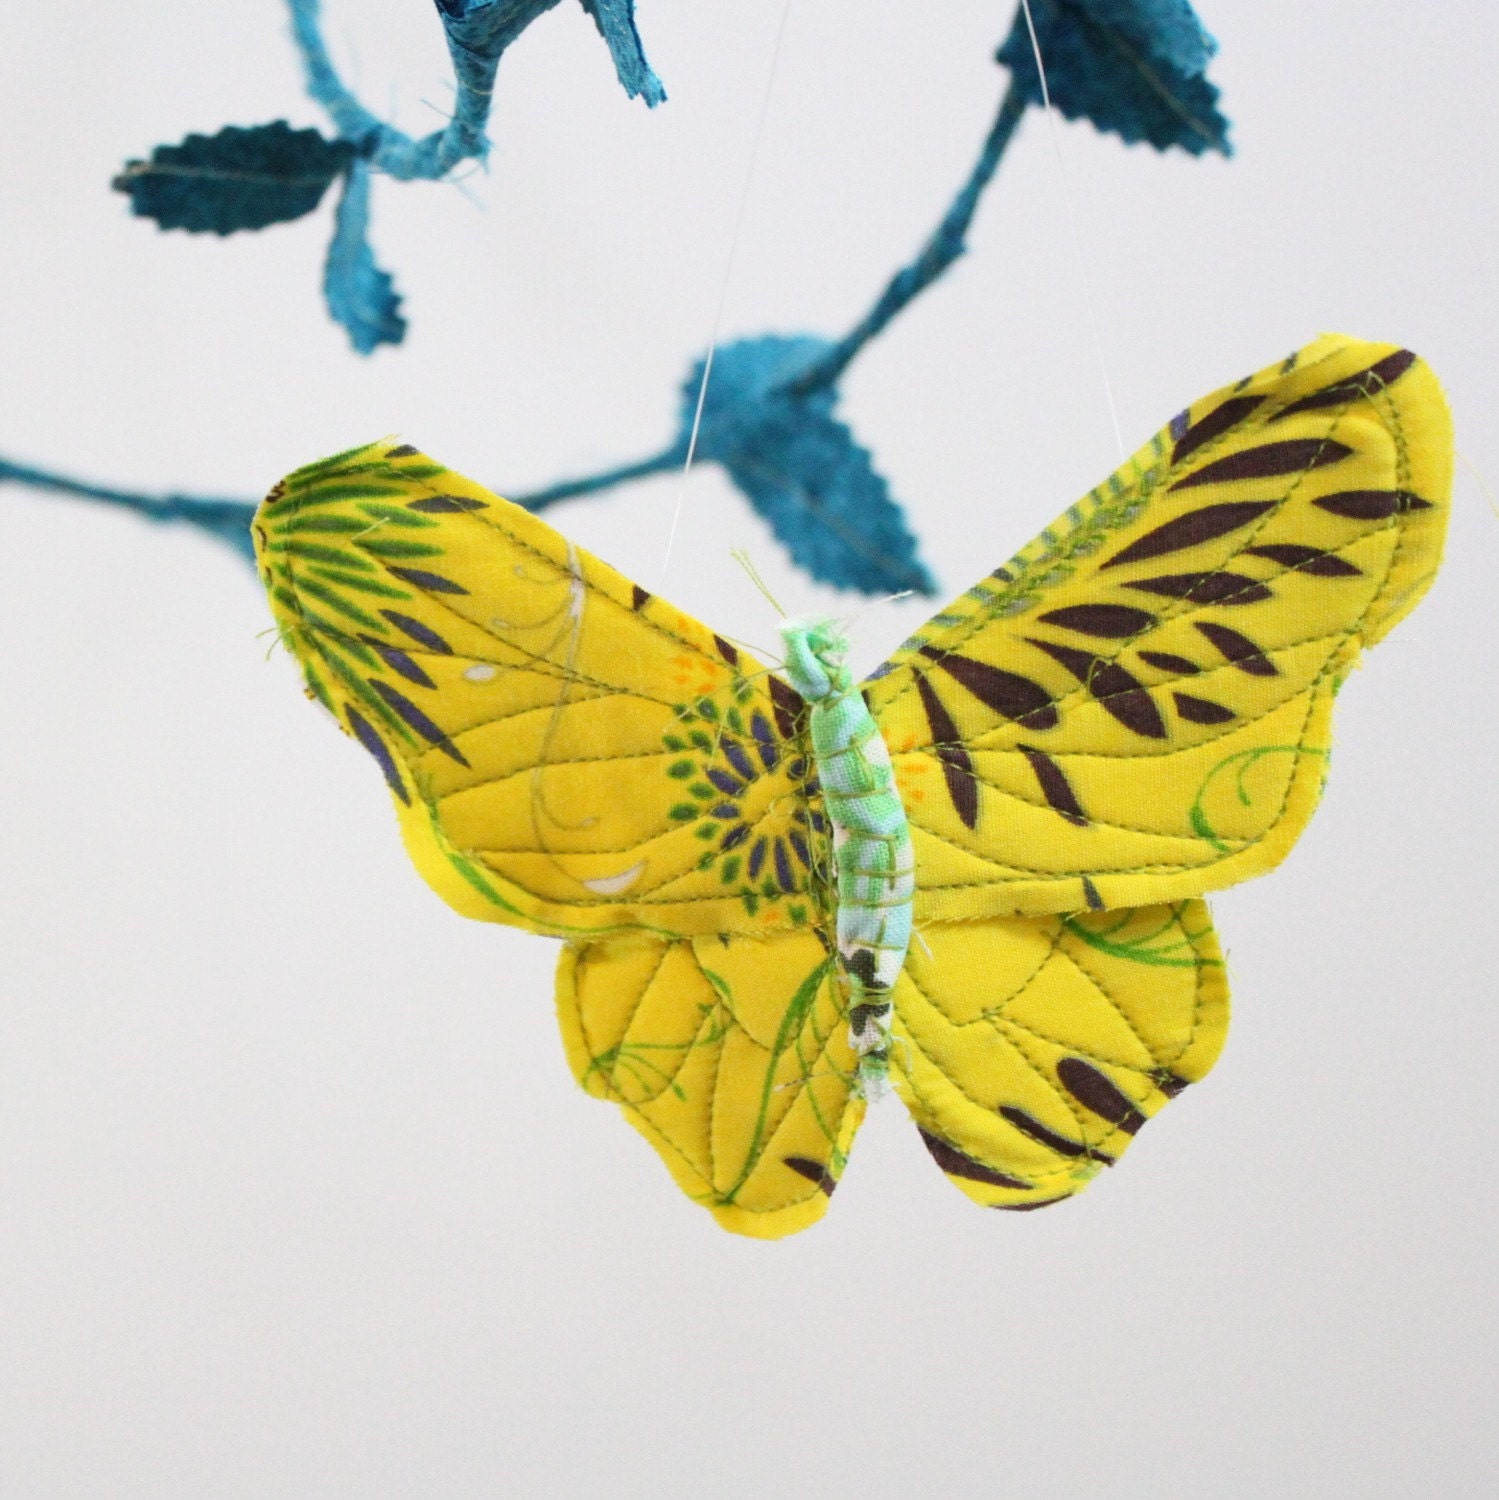 Butterfly Mobile - handmade fabric mobile in peach, bright yellow, teal, turquoise, mint green, tiffany blue, and white